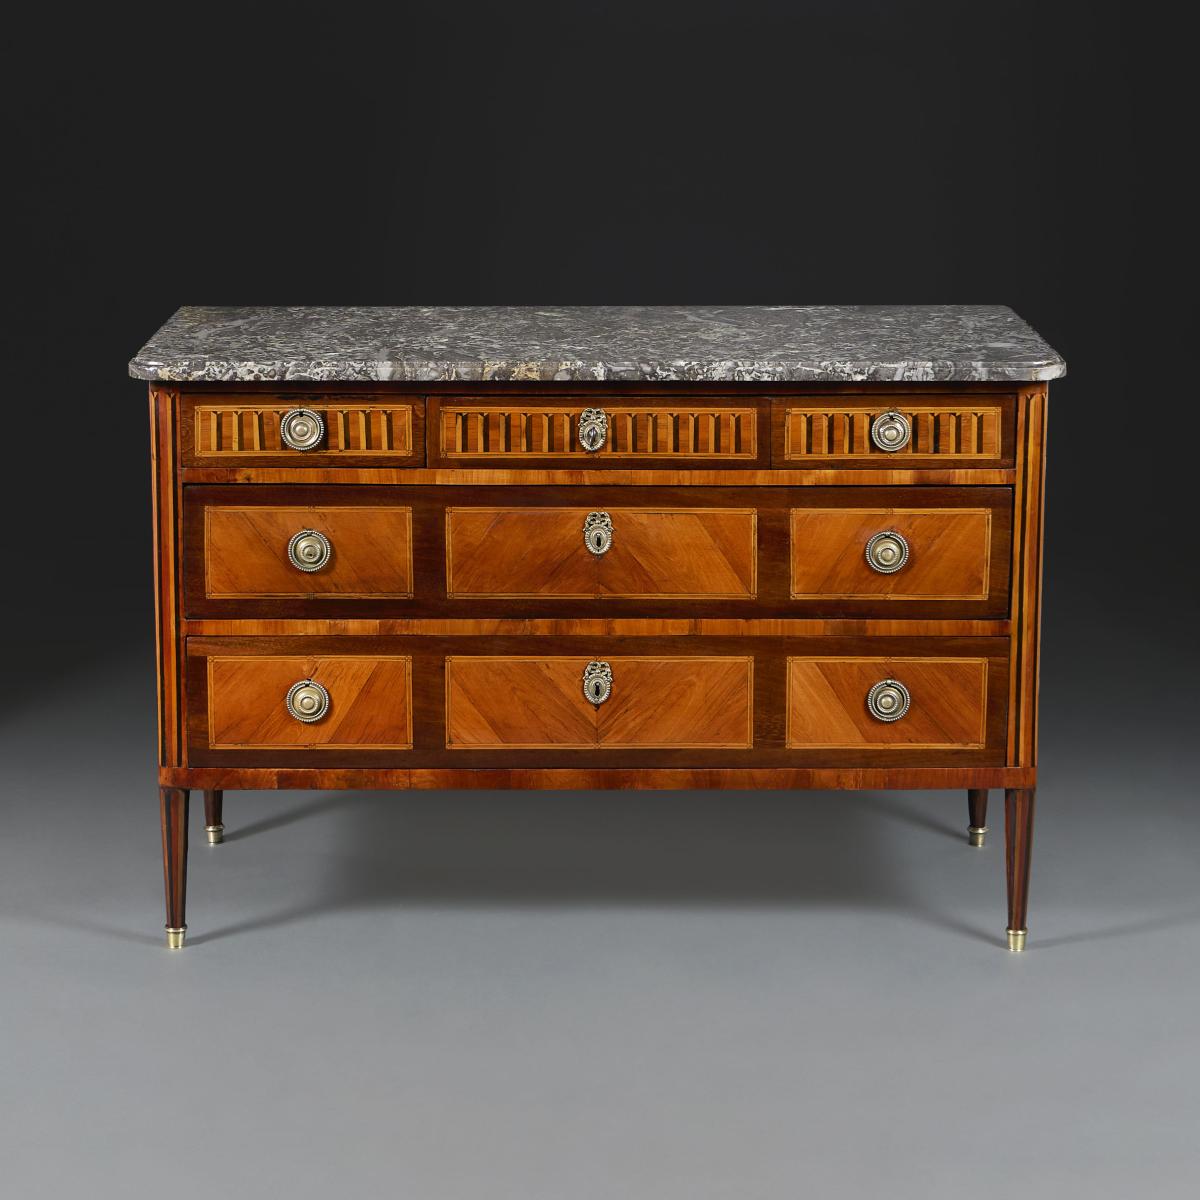 A Louis XVI Tulip Wood Parquetry Commode